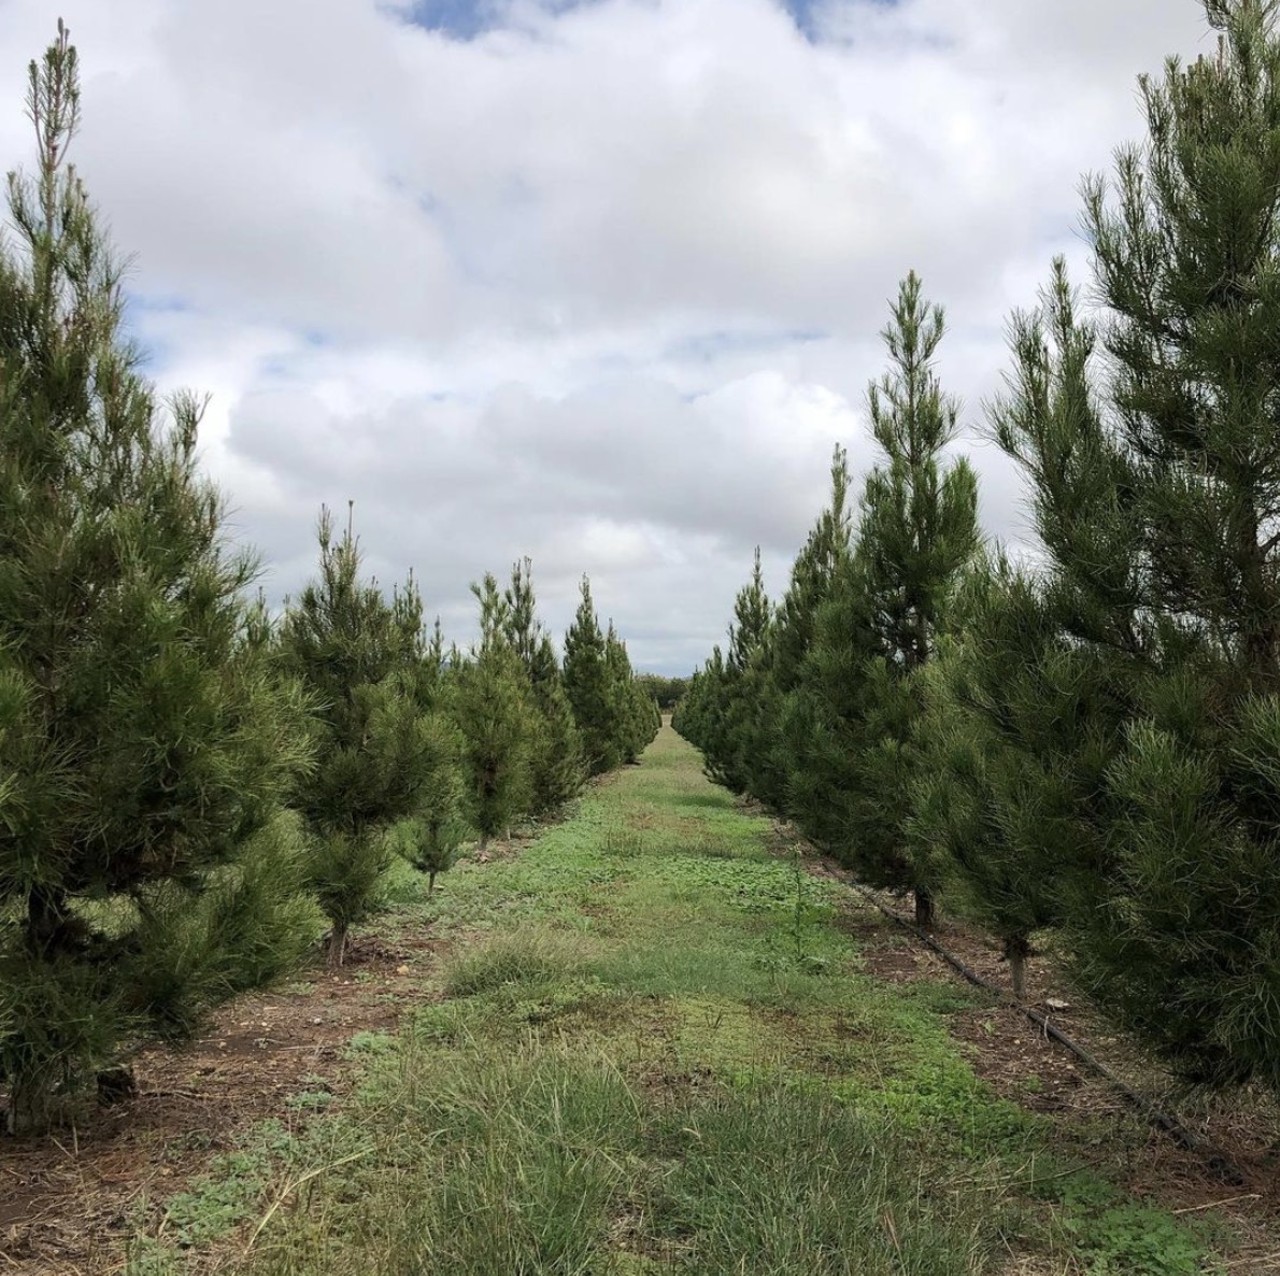 Pipe Creek Tree Farm
805 Phils Road, Pipe Creek, (210) 426-6191, pipecreekchristmastrees.com
Just a short drive to the Hill Country and you’ll be able to visit the land of “living Christmas trees.” This farm is open 11 a.m. to 5:45 p.m. daily so that Texans near and far can pick out and cut their fresh tree of choice. The folks here can cut the tree if you want them to, and they can also wrap your tree for the ride home. If you visit on the weekends, you and the family can also take a hayride!
Photo via Instagram / kimkileyfleer